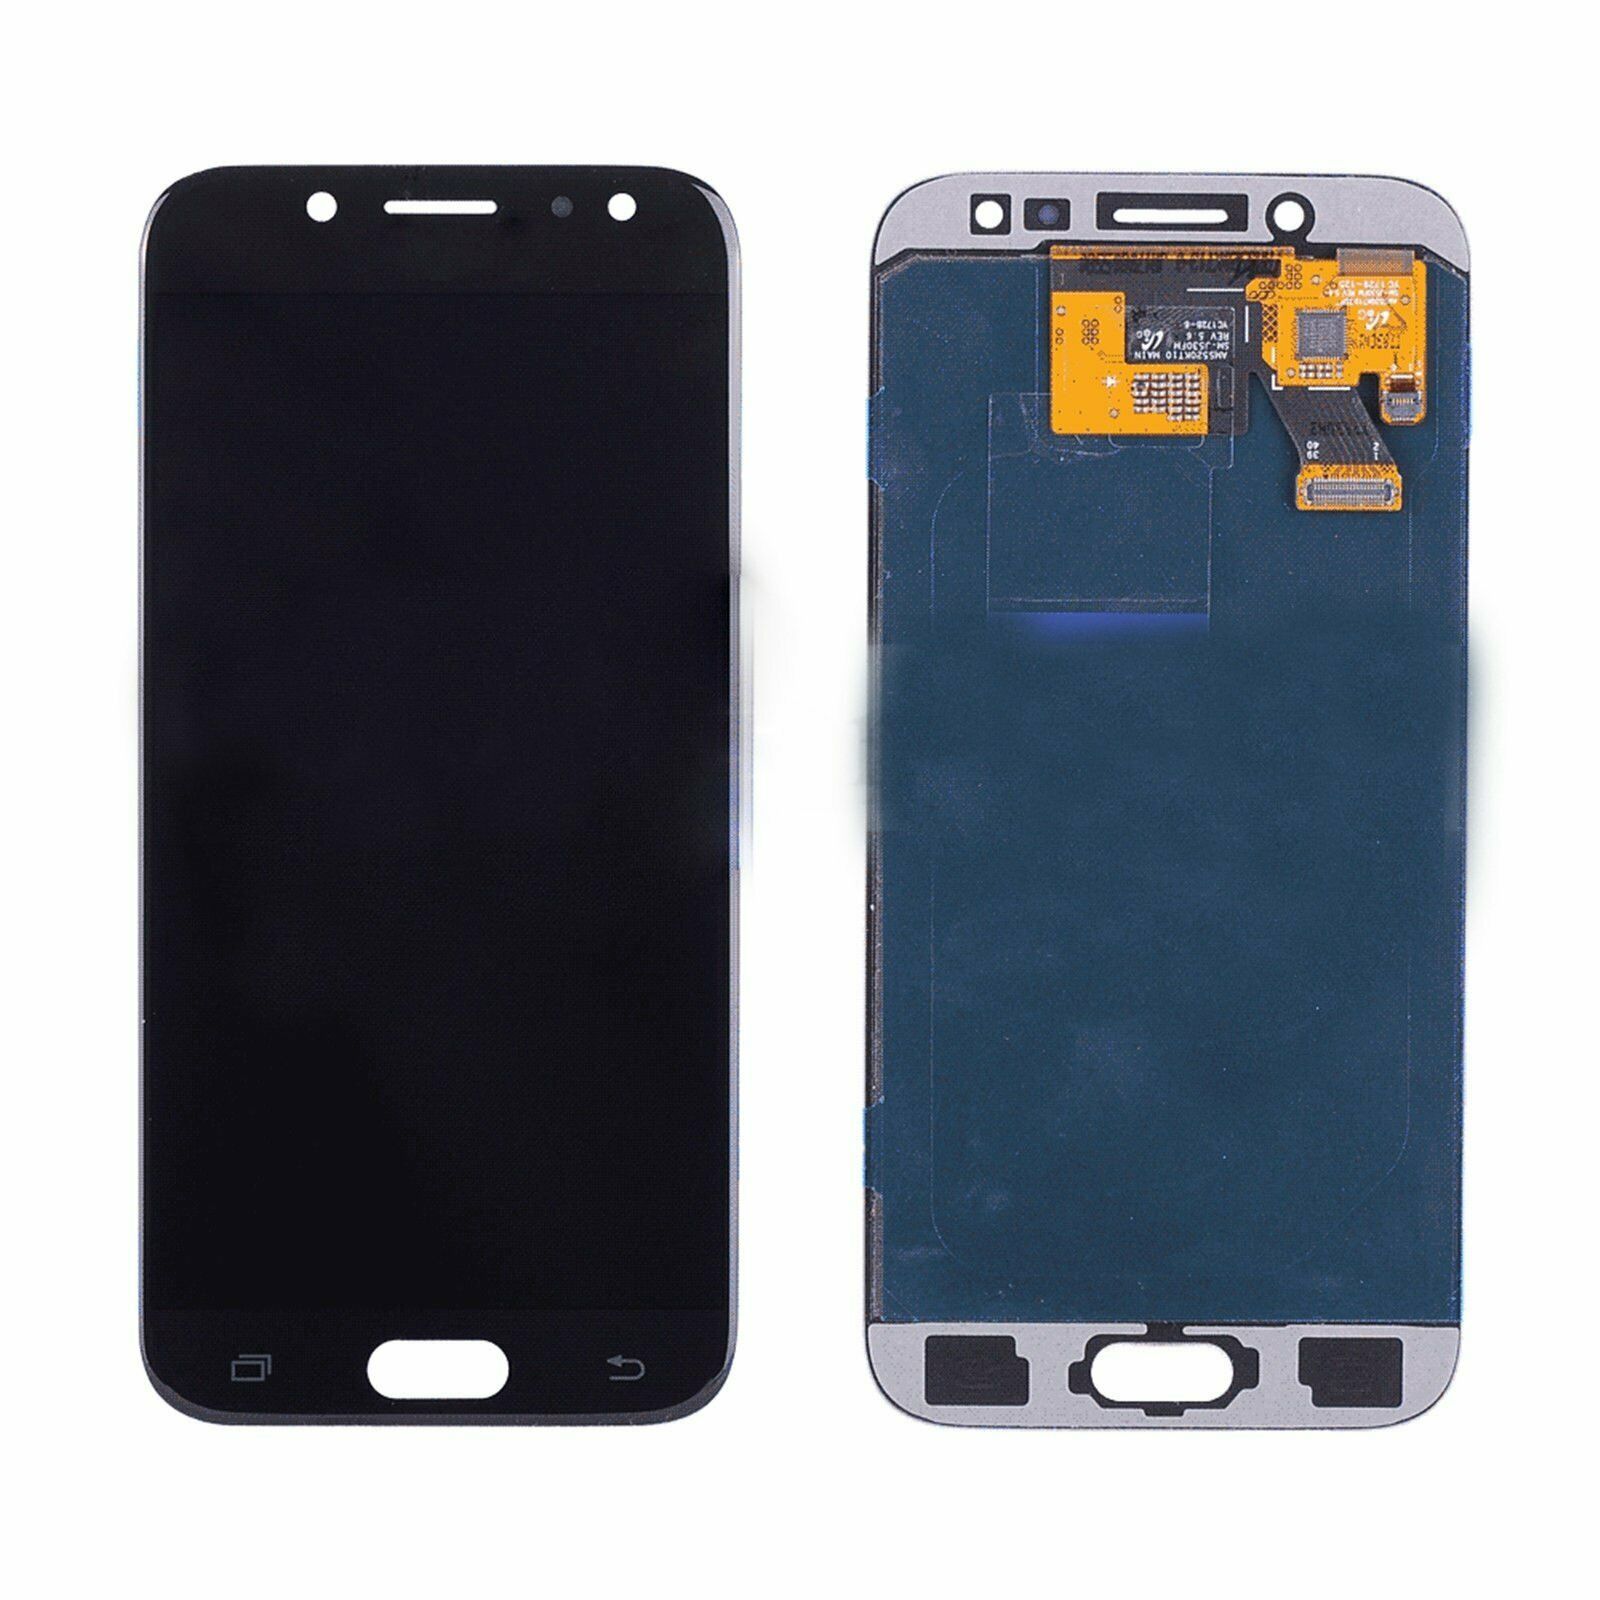 Amoled For Samsung J5 Pro 17 Sm J530f Ds Lcd Display Touch Screen Digitizer Replaceme With